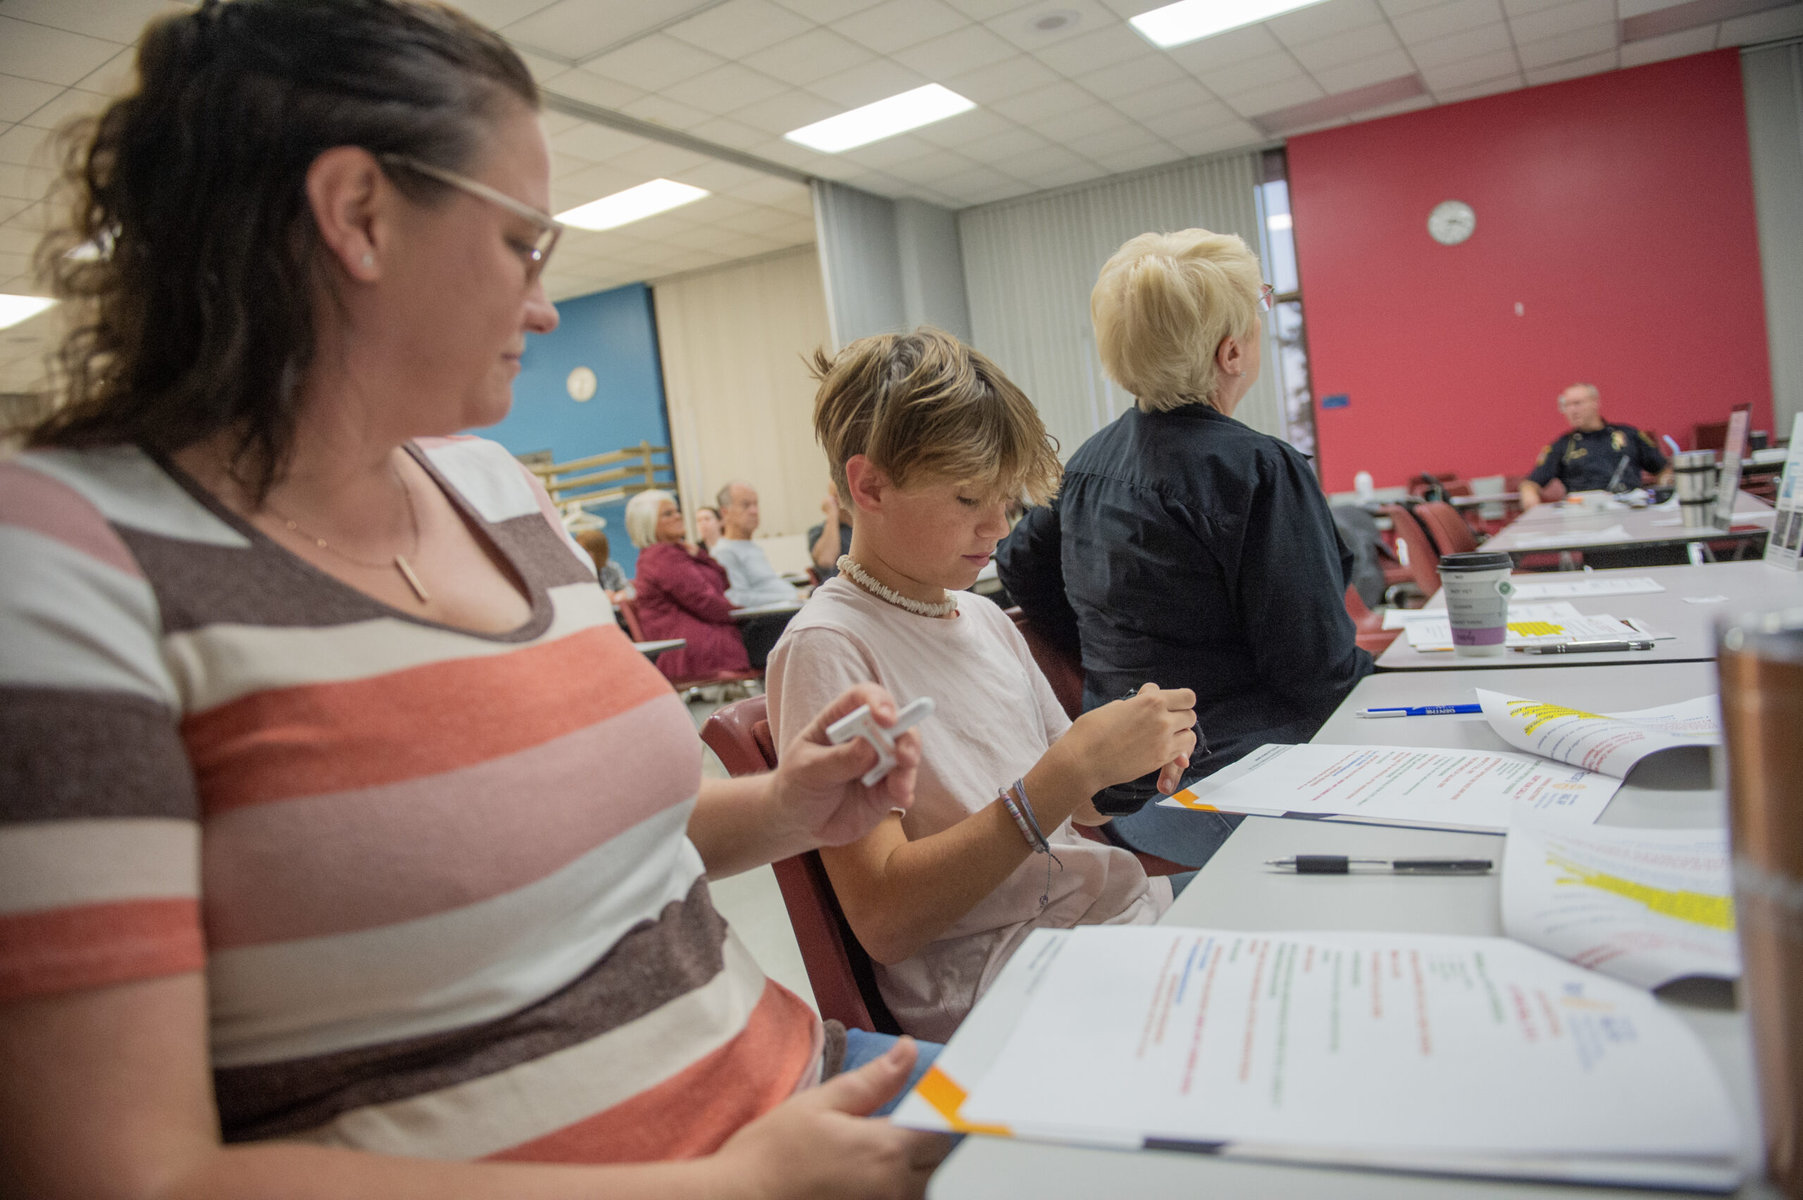 Samantha Appleton (left) and her son attend a training session to learn how to use naloxone to prevent overdose deaths through Project Smart.